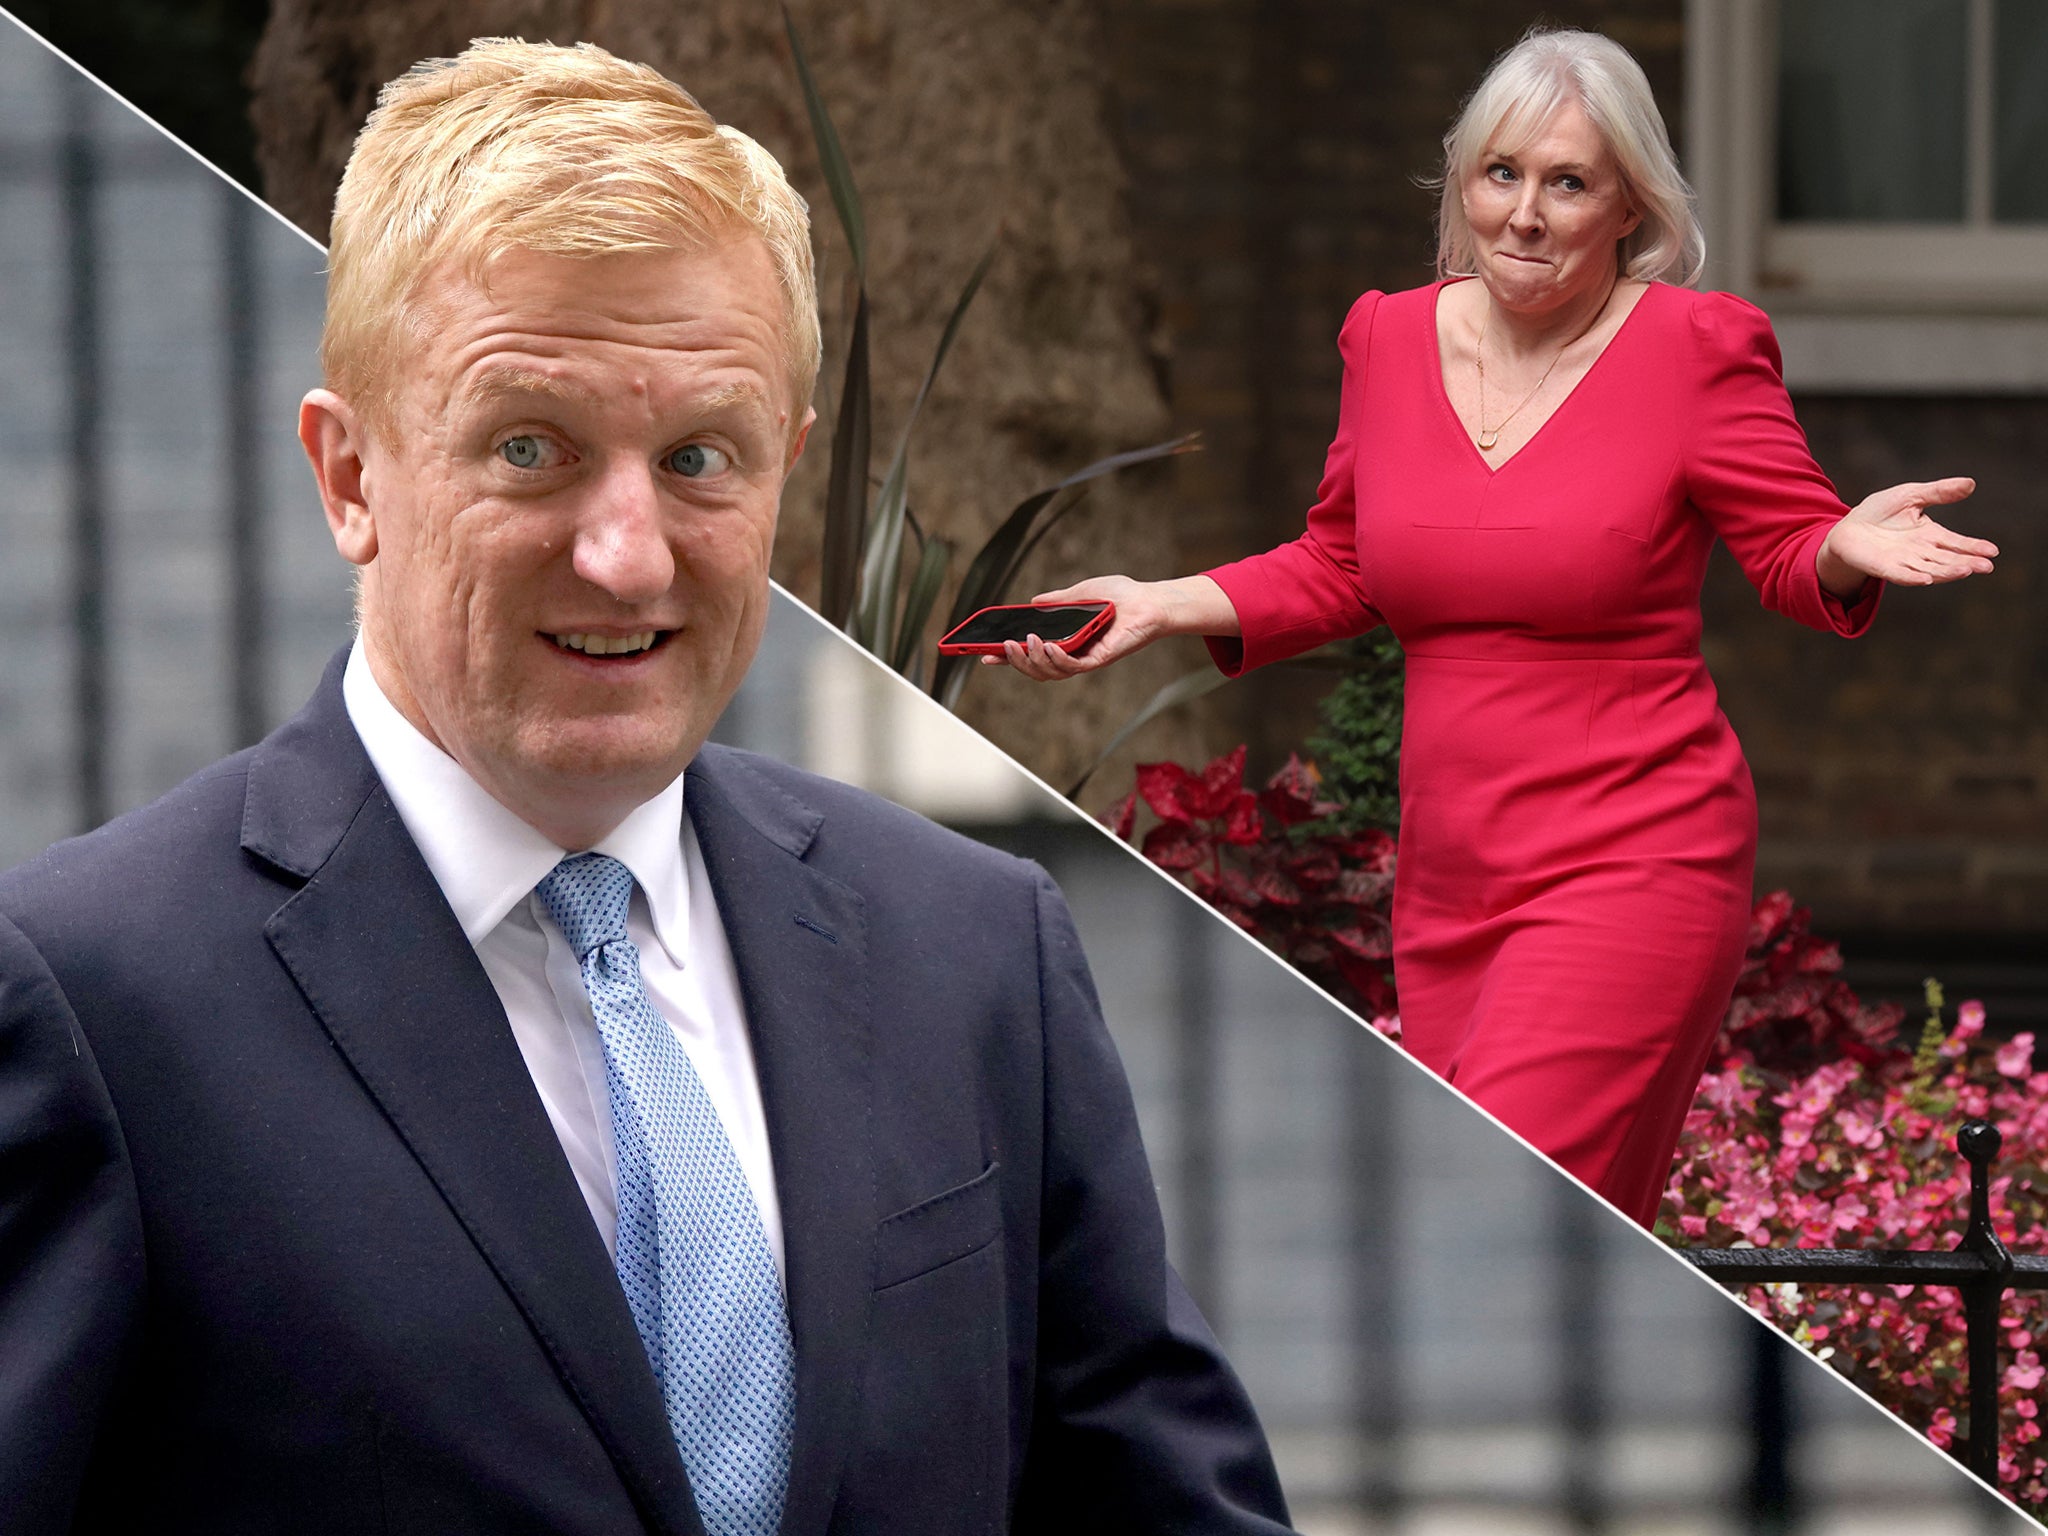 The public will be hearing much more from Oliver Dowden and Nadine Dorries after the reshuffle